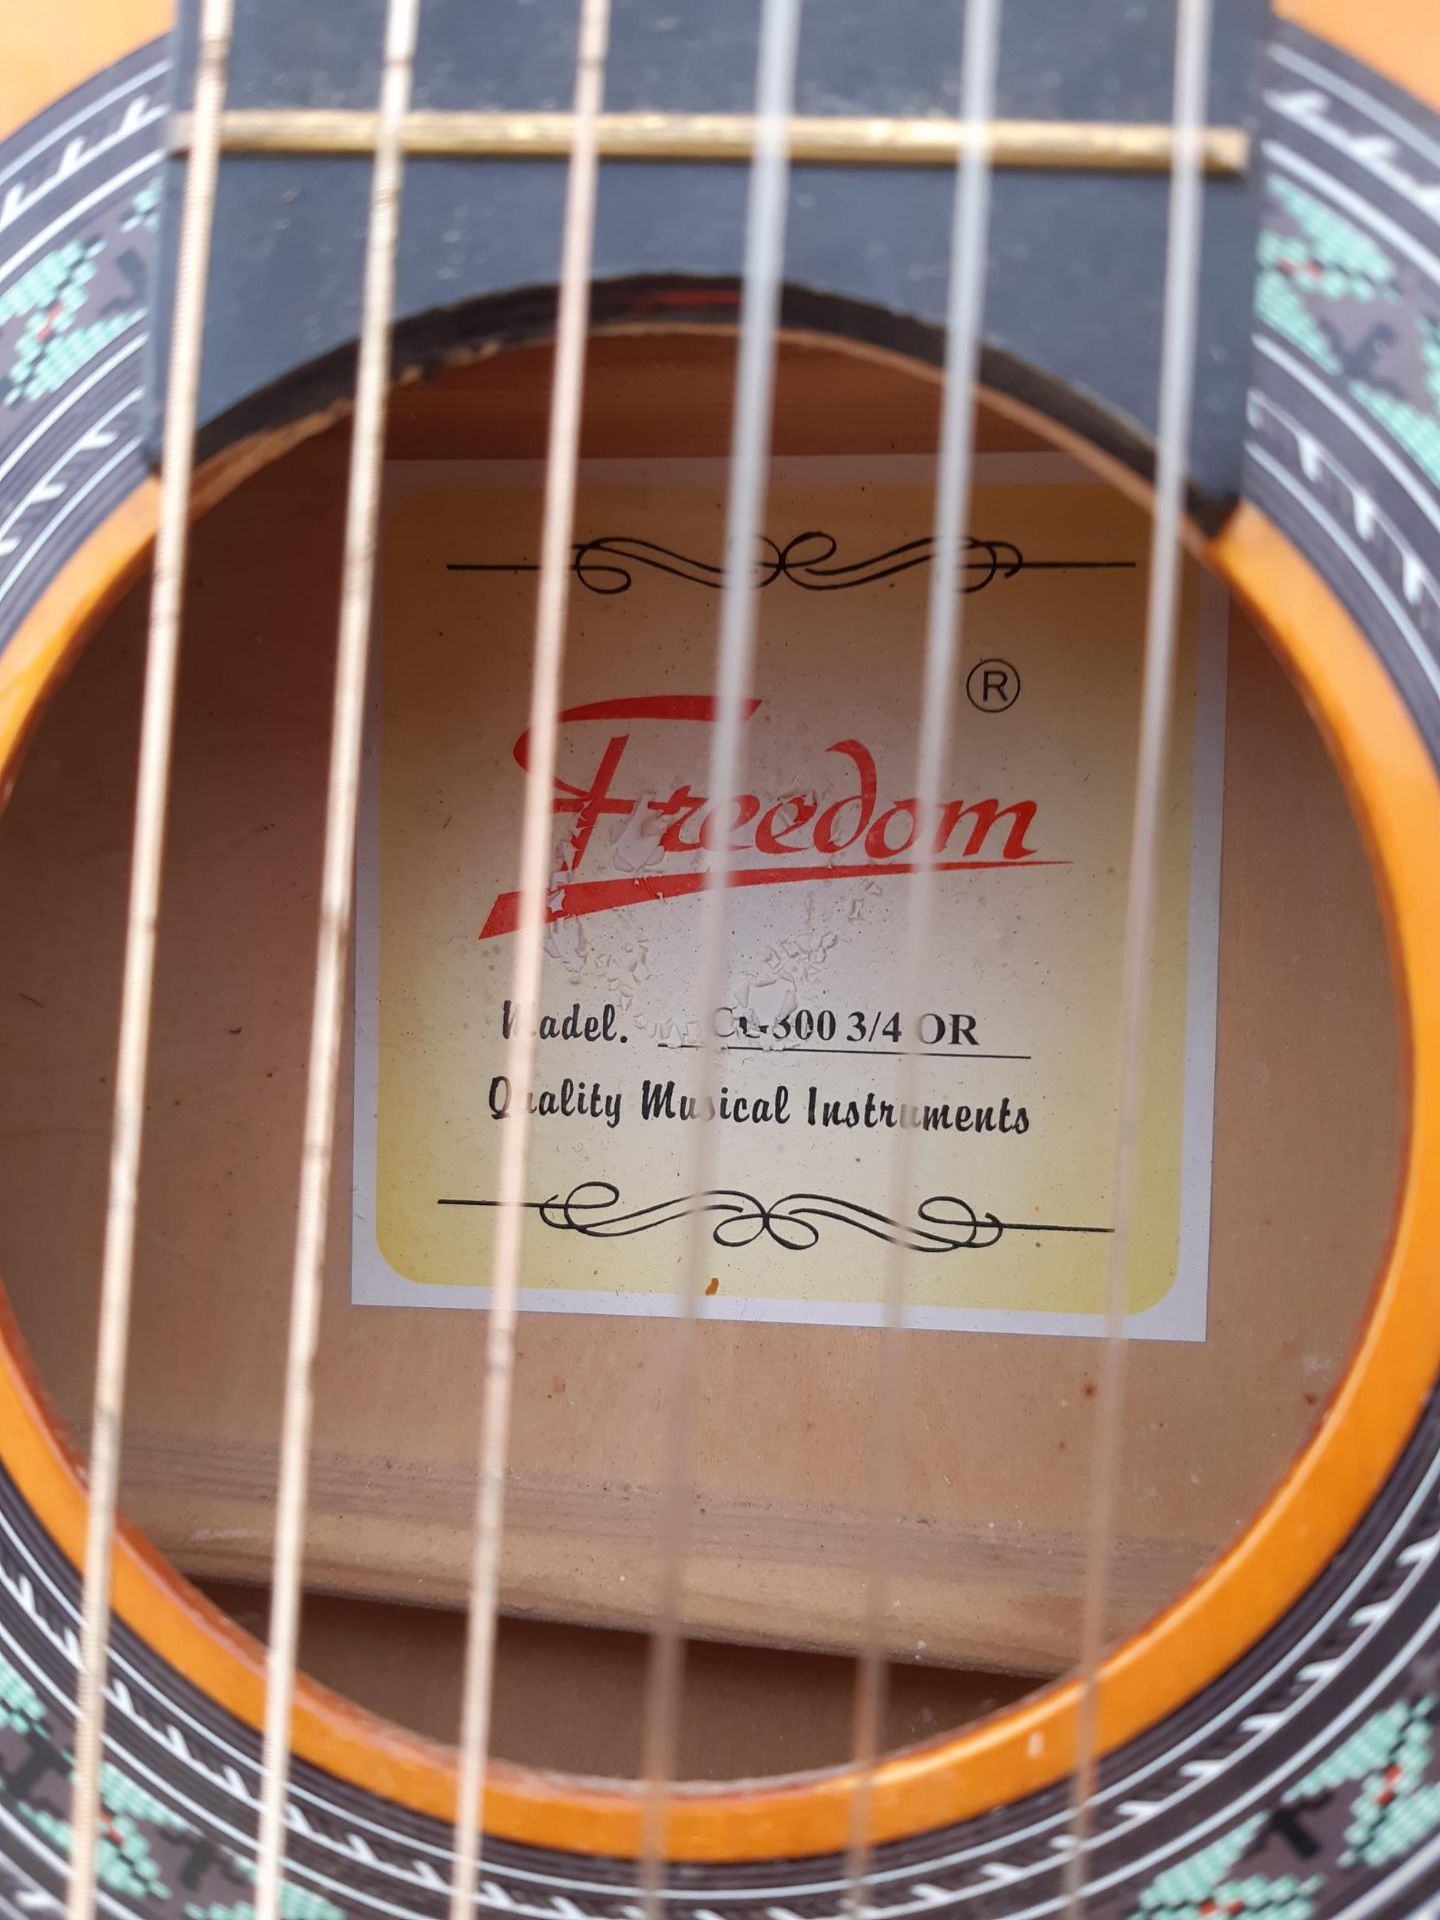 A FREEDOM ACOUSTIC GUITAR - Image 2 of 2